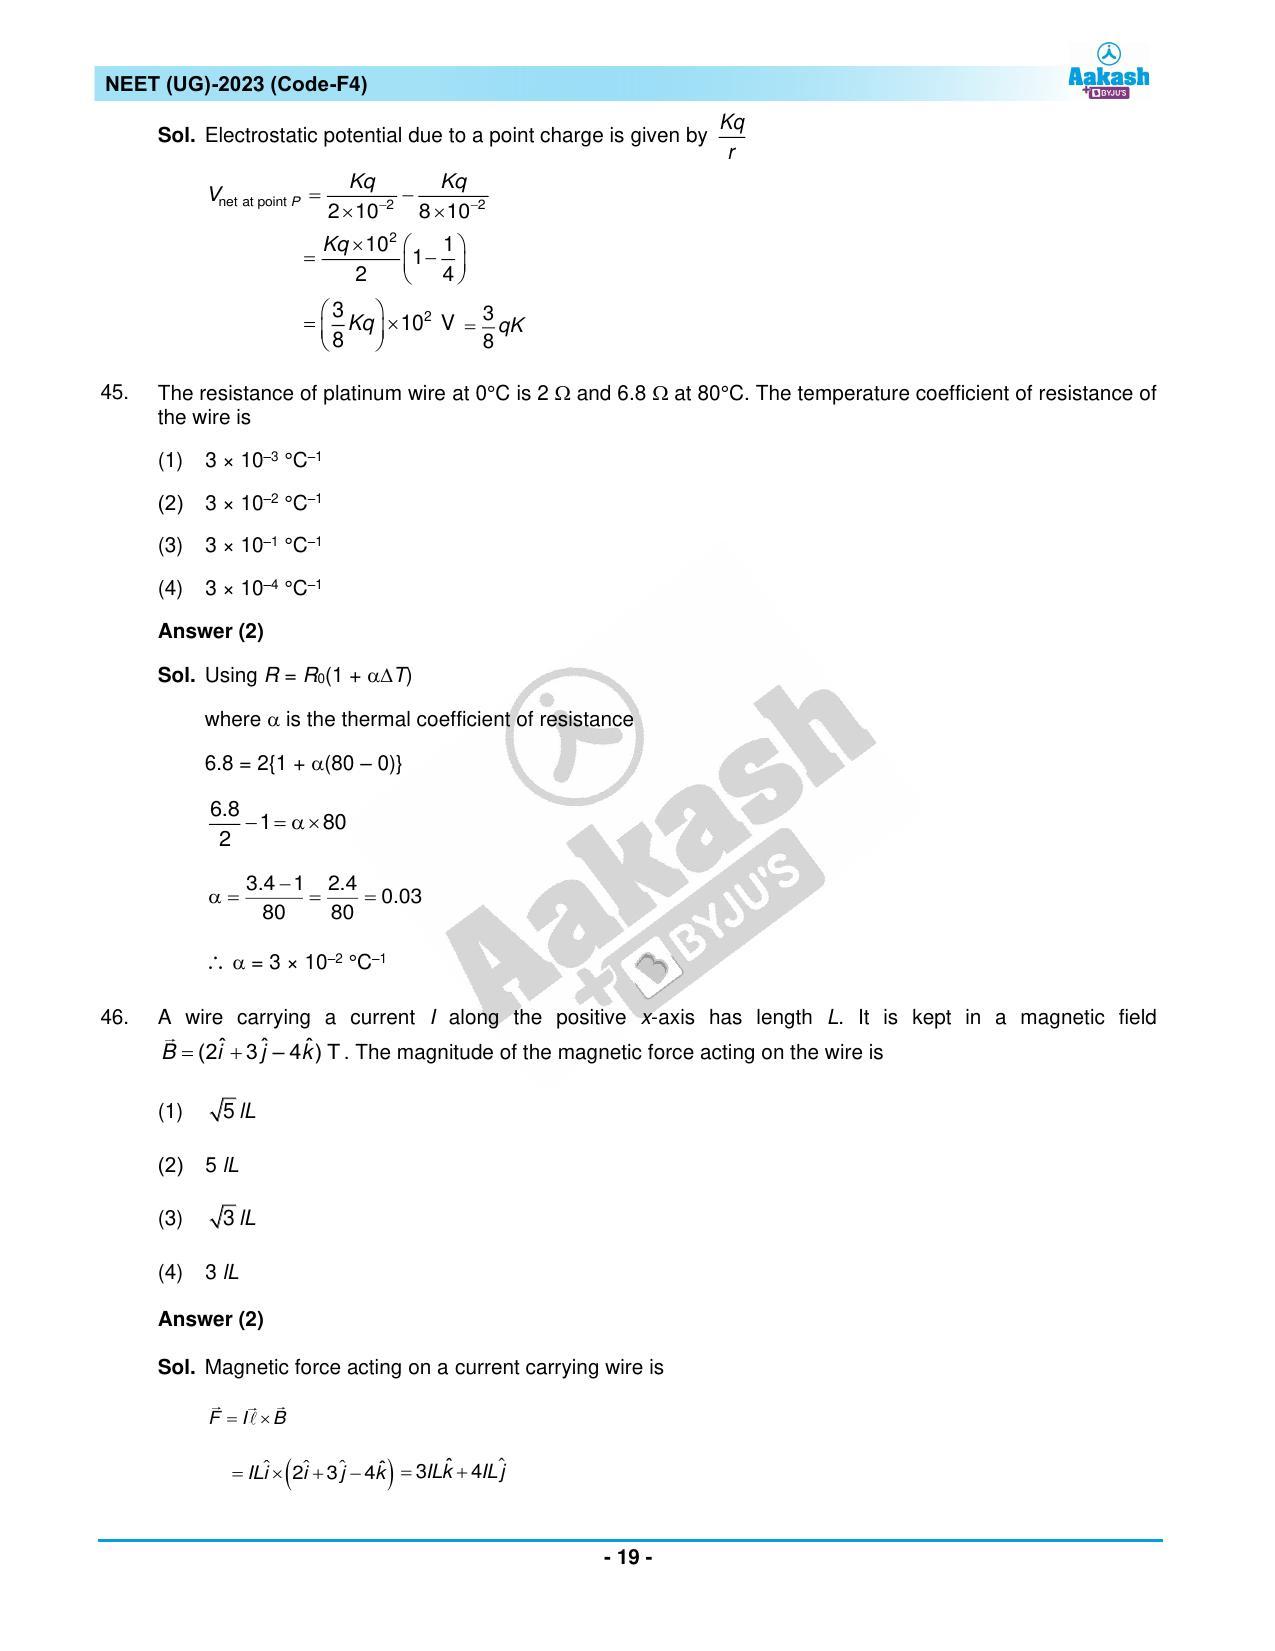 NEET 2023 Question Paper F4 - Page 19